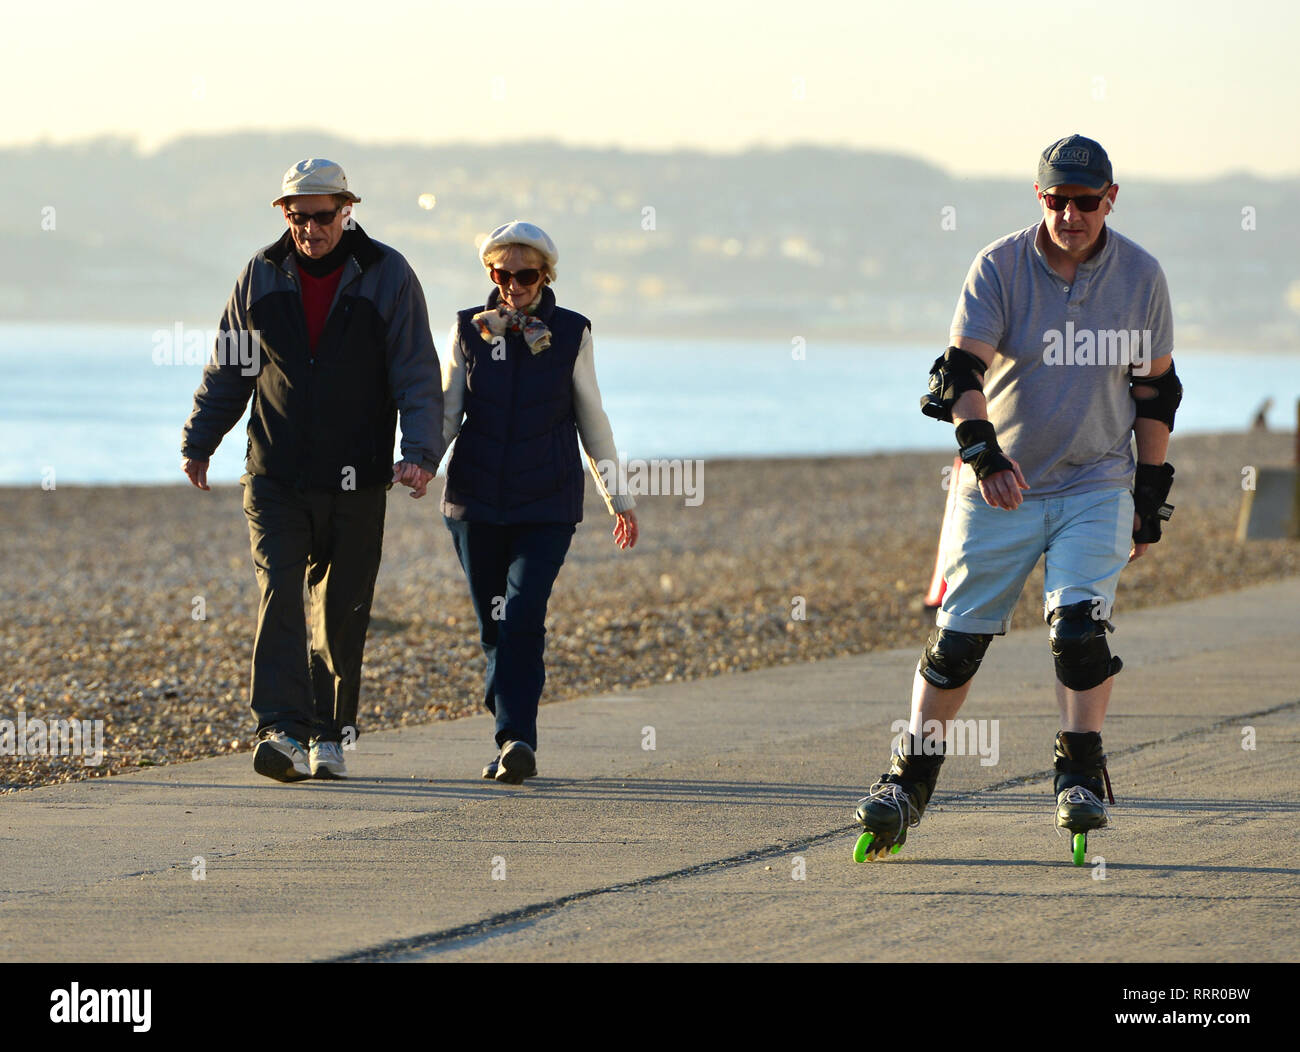 Seaford, East Sussex, UK. 26th Feb, 2019. People enjoying the warm sun in Seaford, East Sussex, on the hottest winter day on record. Credit: Peter Cripps/Alamy Live News Stock Photo